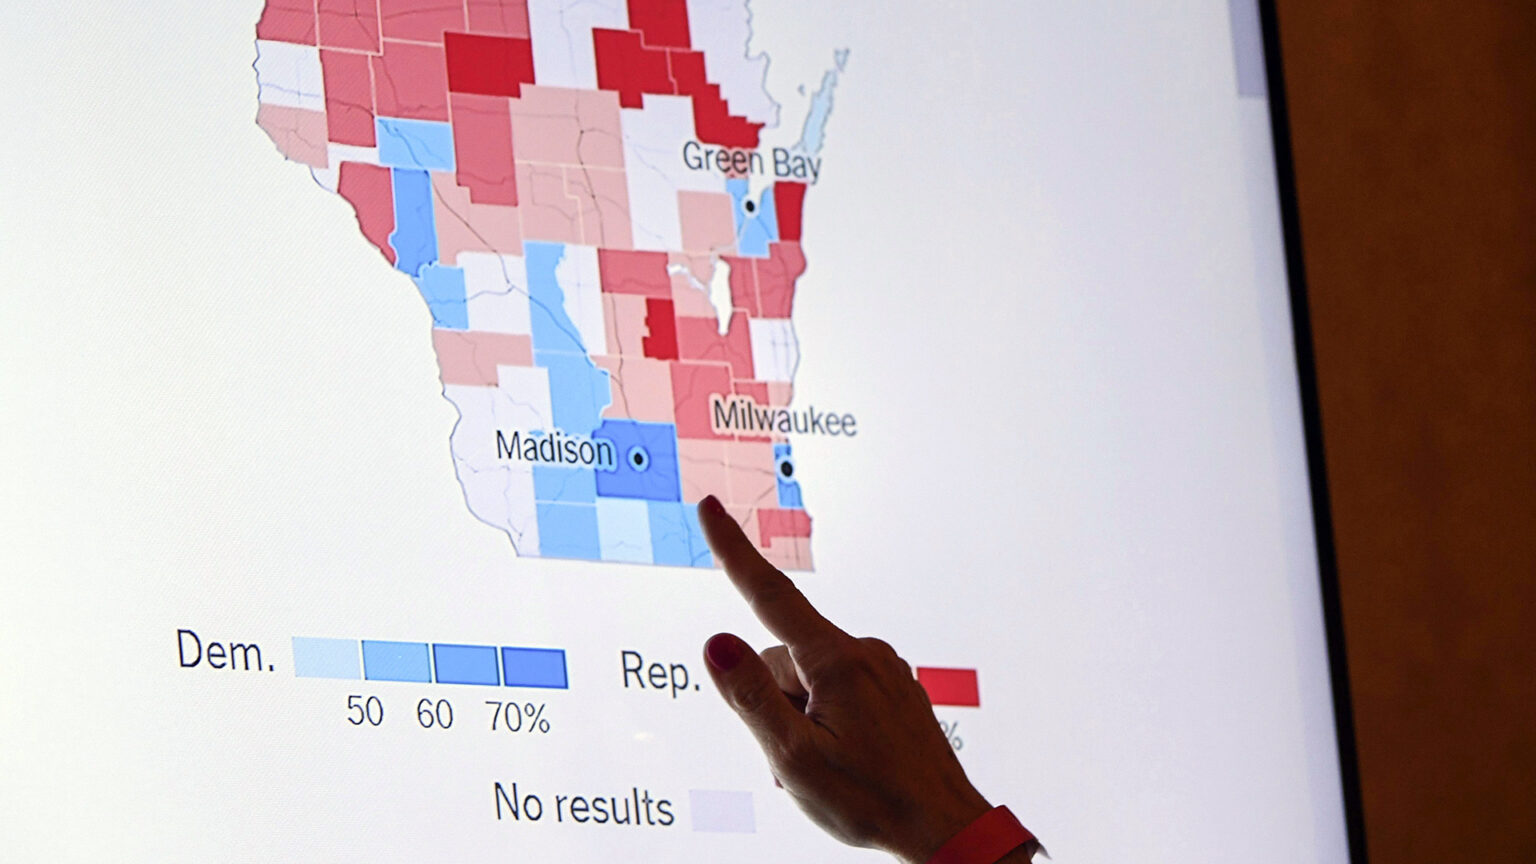 The index finger of a right hand points toward a screen featuring a map of Wisconsin showing the county-level results by percentage for Democratic and Republican candidates.